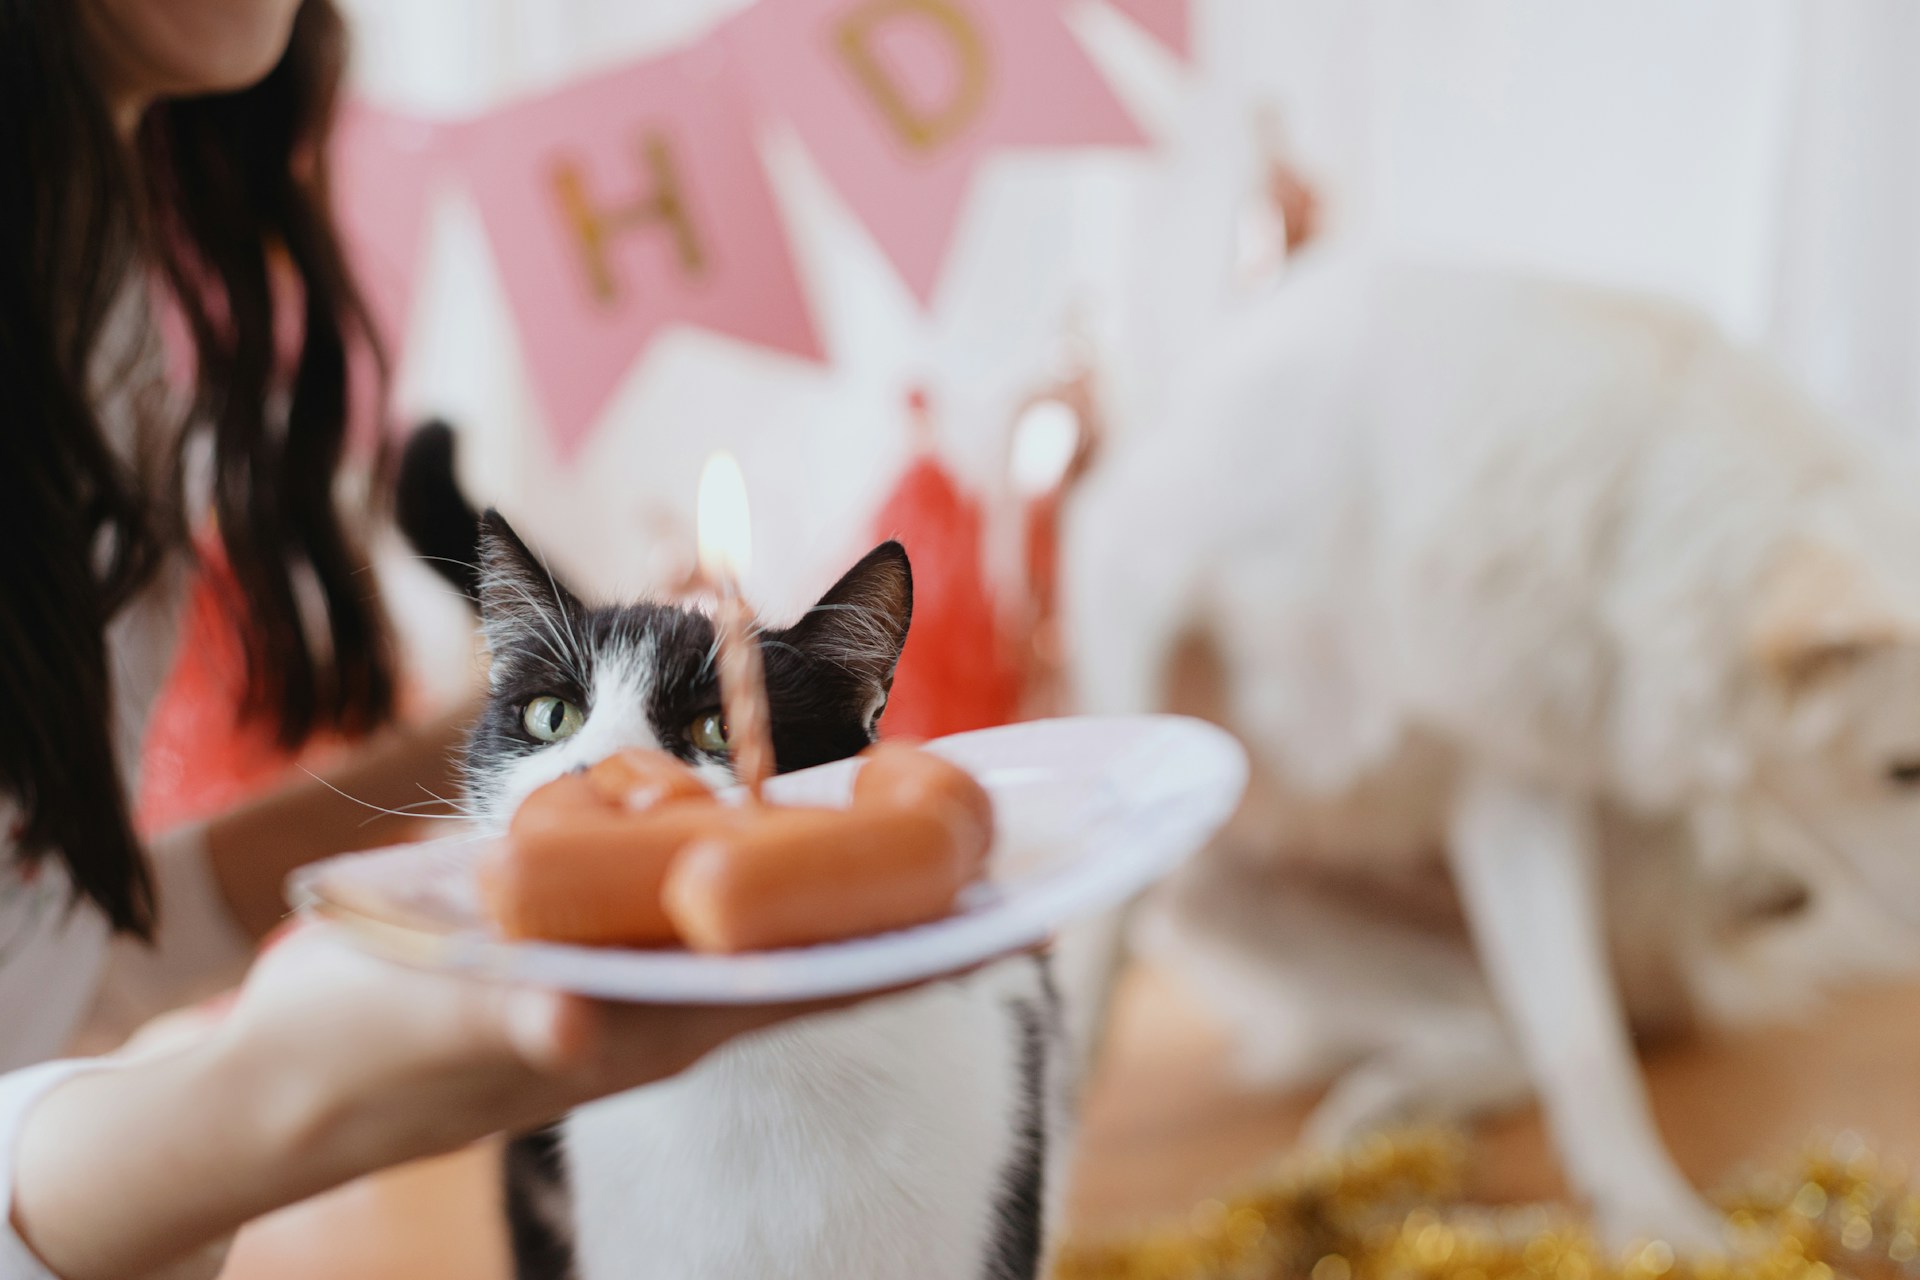 A cat sniffing a plate of sweets at a party